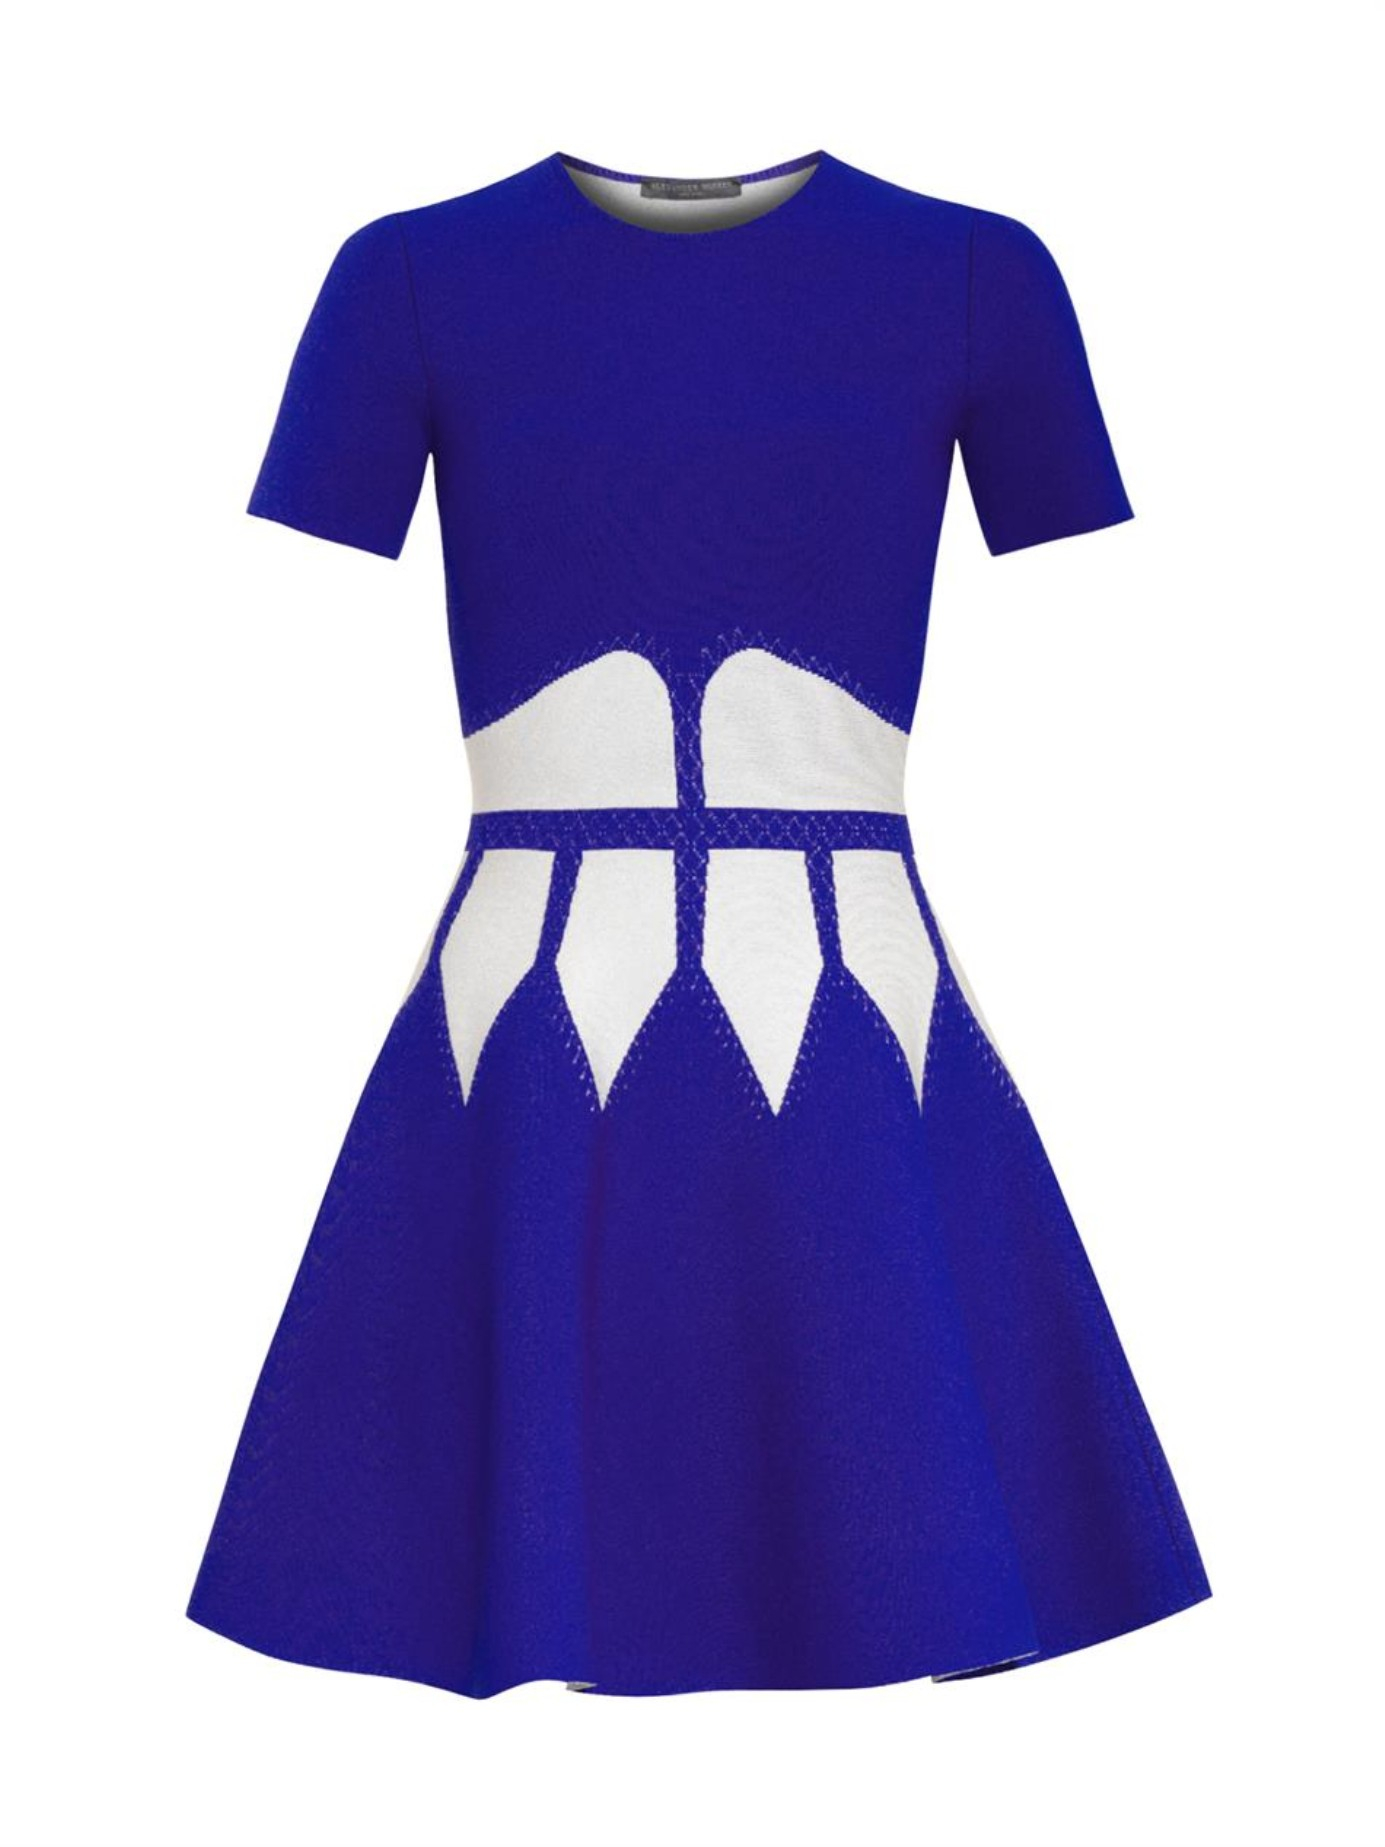 https://ufonomore.com/recently-added/alexander-mcqueen-corset-intarsia-stretch-knit-dress-in-blue